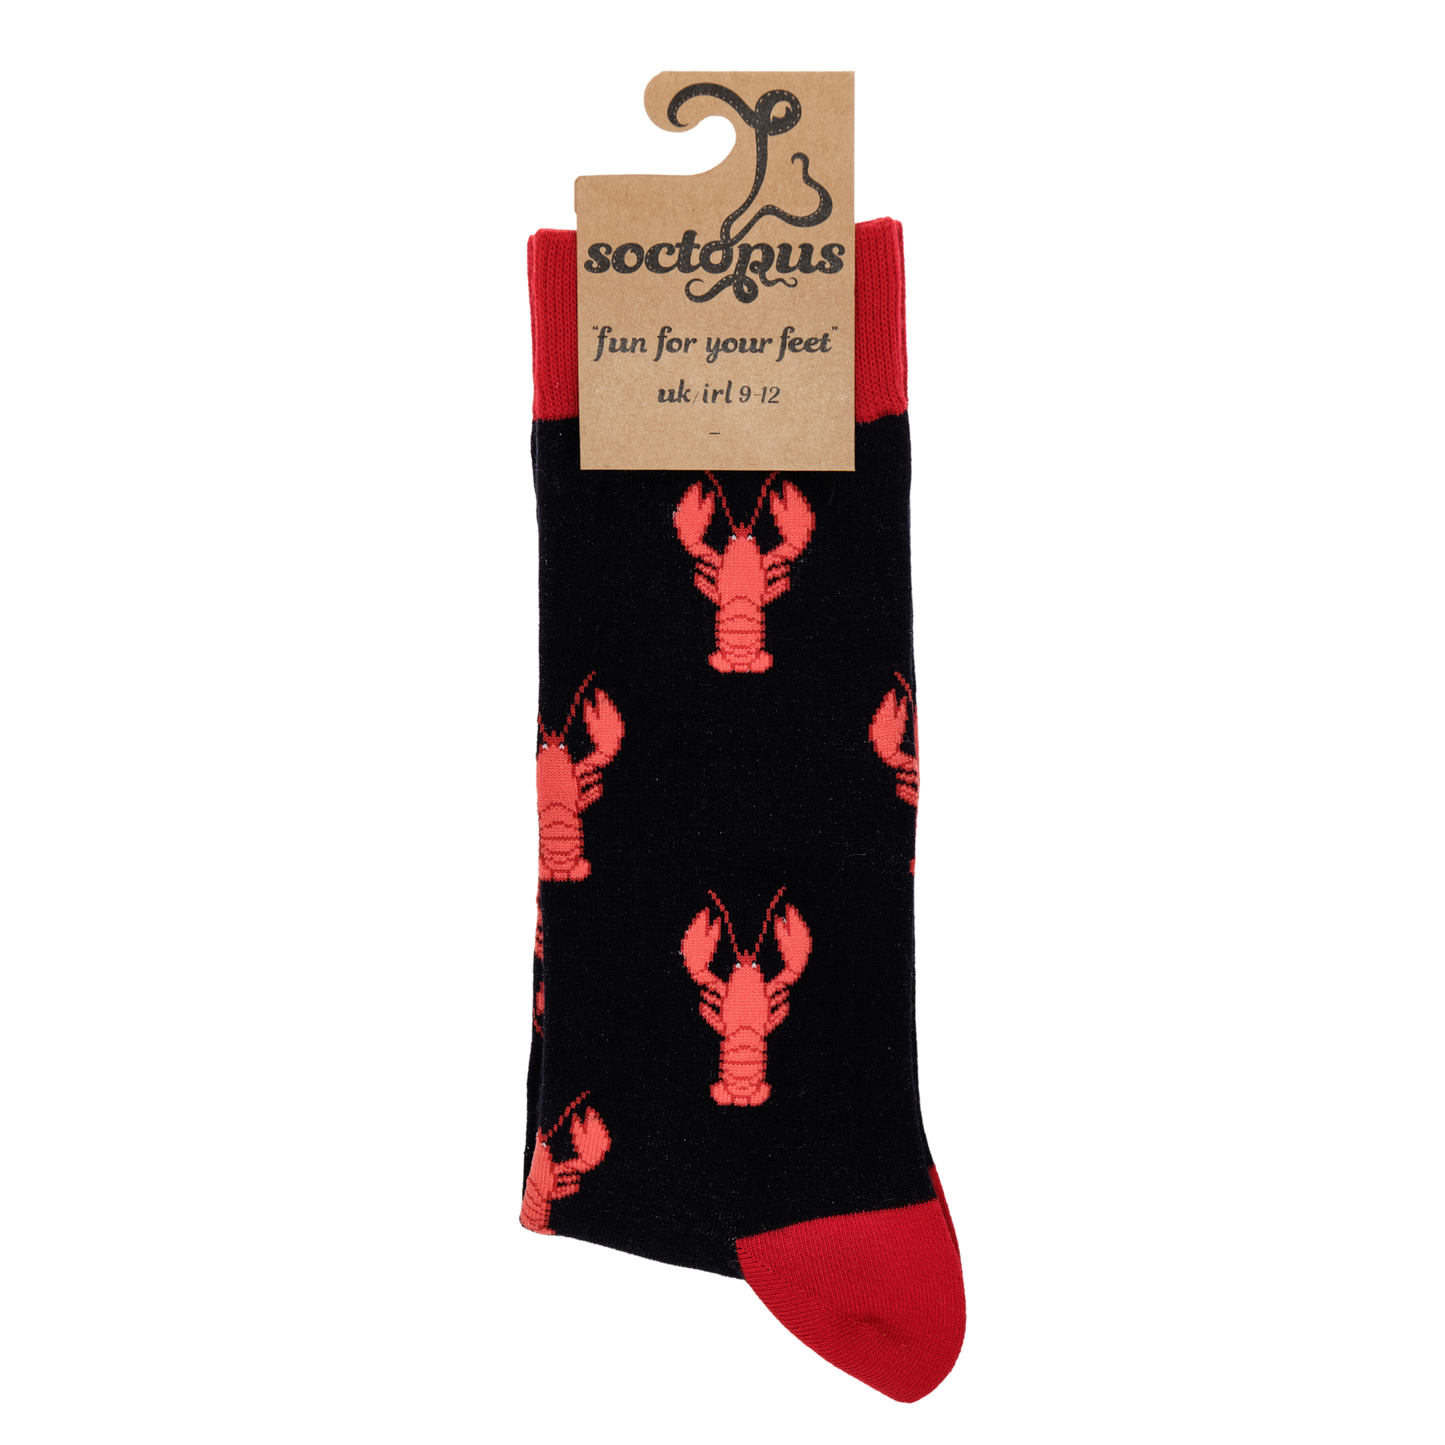 The World Is Your Lobster Socks